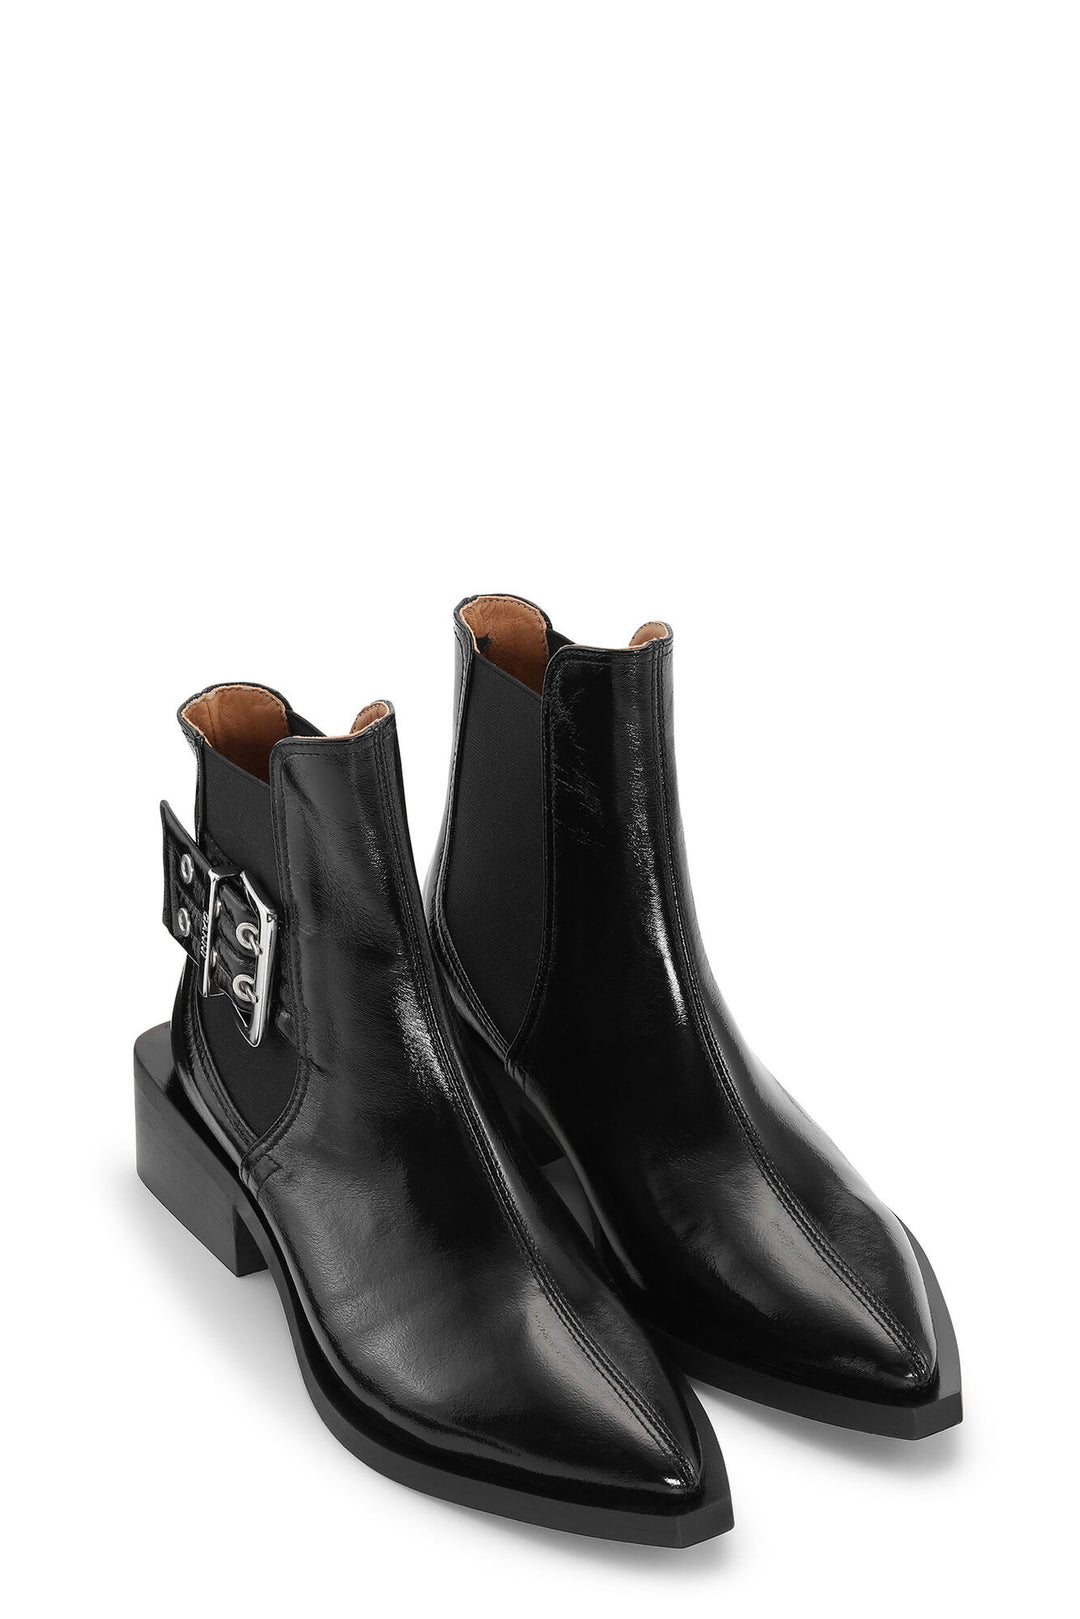 CHUNKY BUCKLE CHELSEA BOOT NAPLACK  099 Black